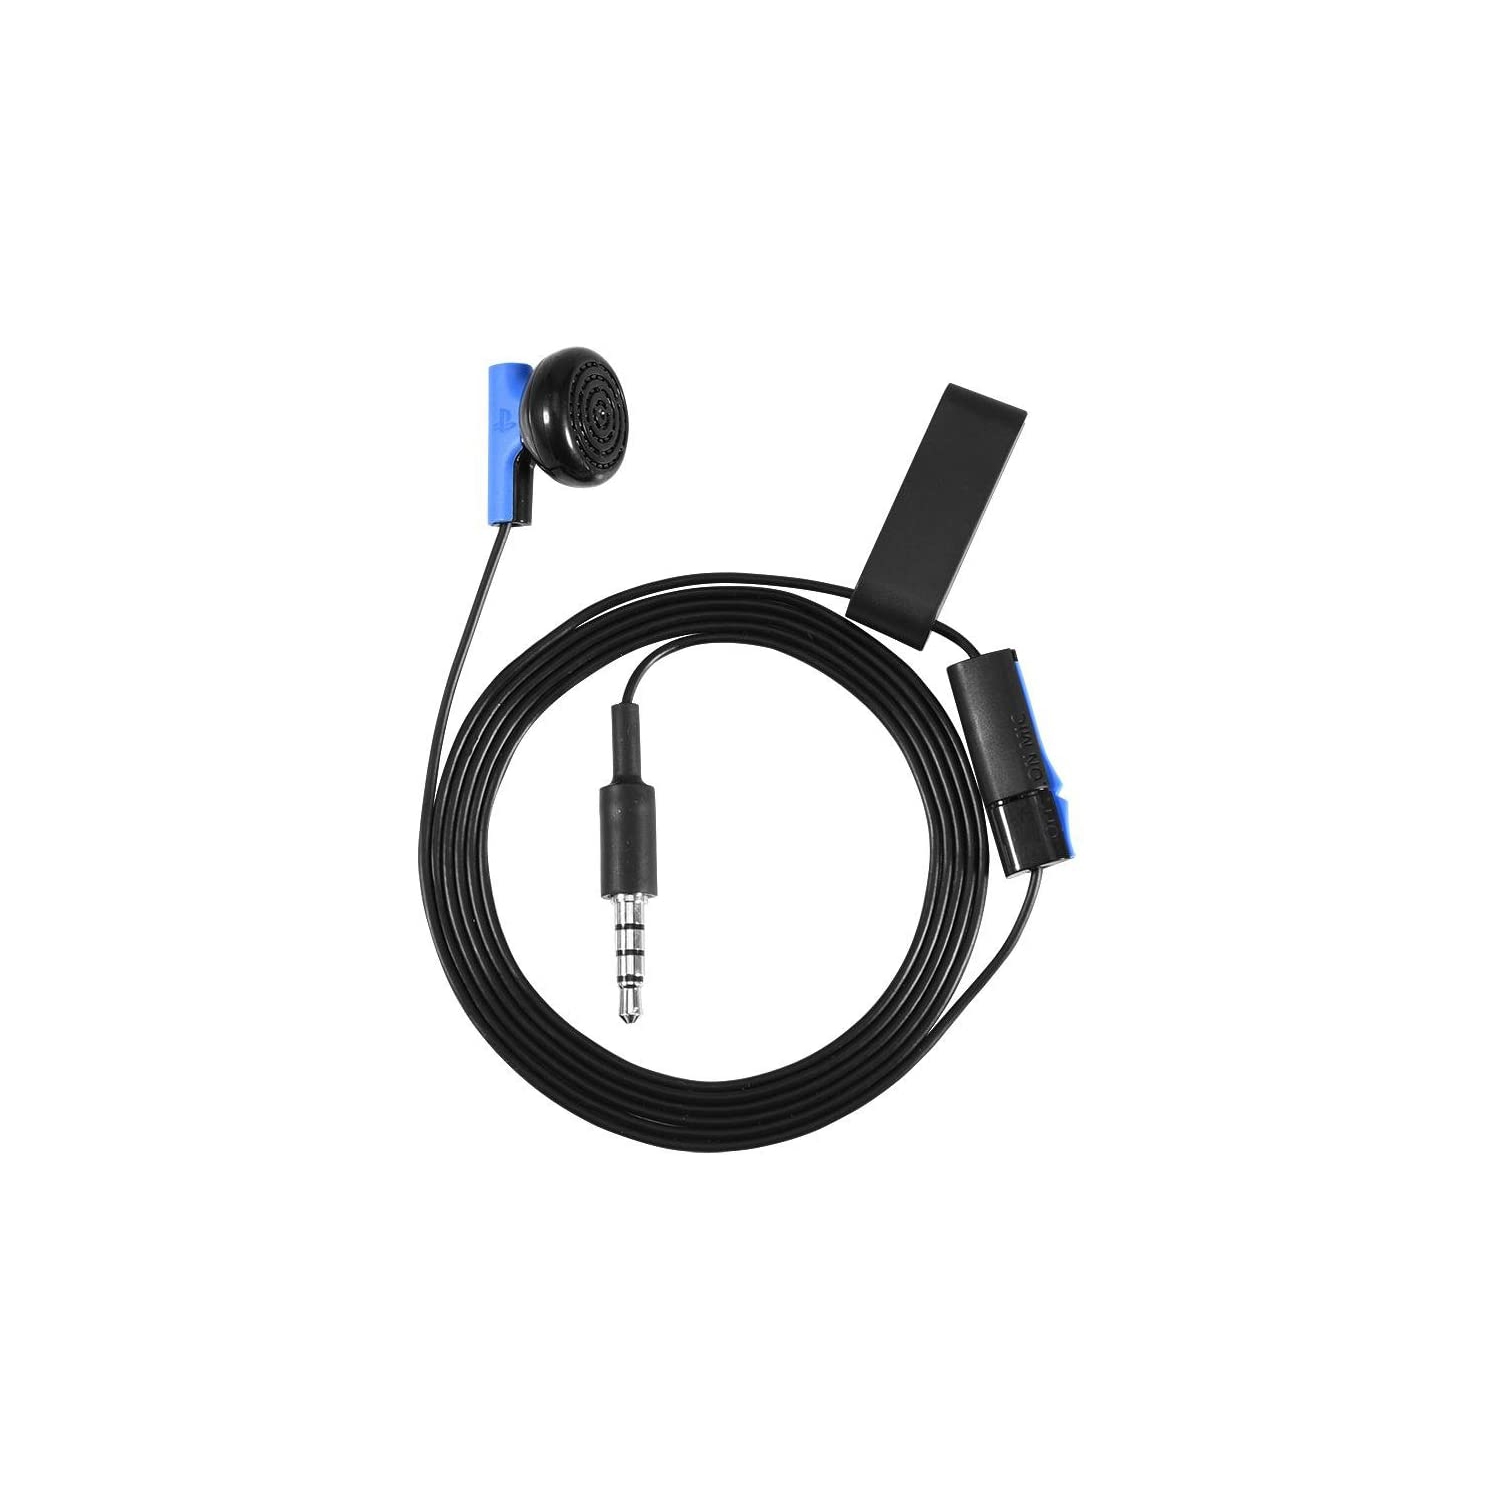 Gaming Headset 3.5mm Gaming Earphone in-Ear Earbuds Headphone Headset with Mic for Sony Playstation 4 PS4 Controller